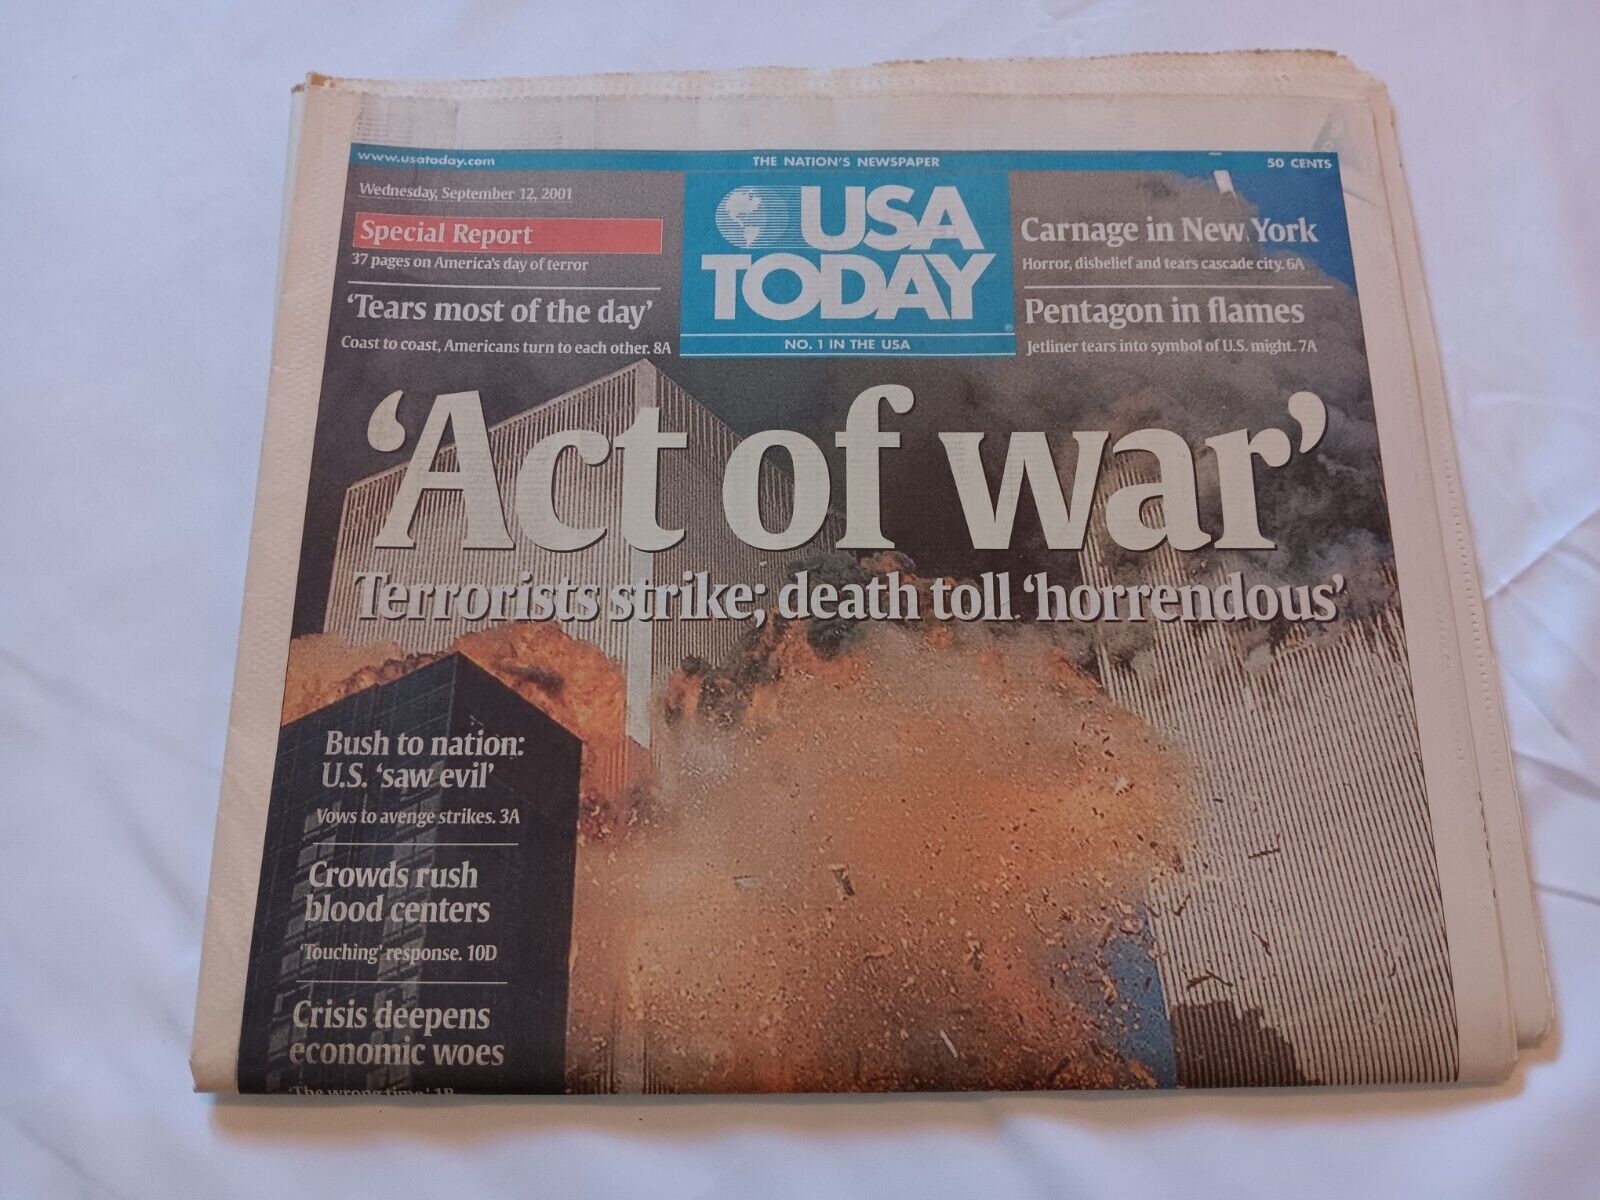 USA Today September 12, 2001 Full Newspaper 9/11 “Act of War” COMPLETE VERY NICE